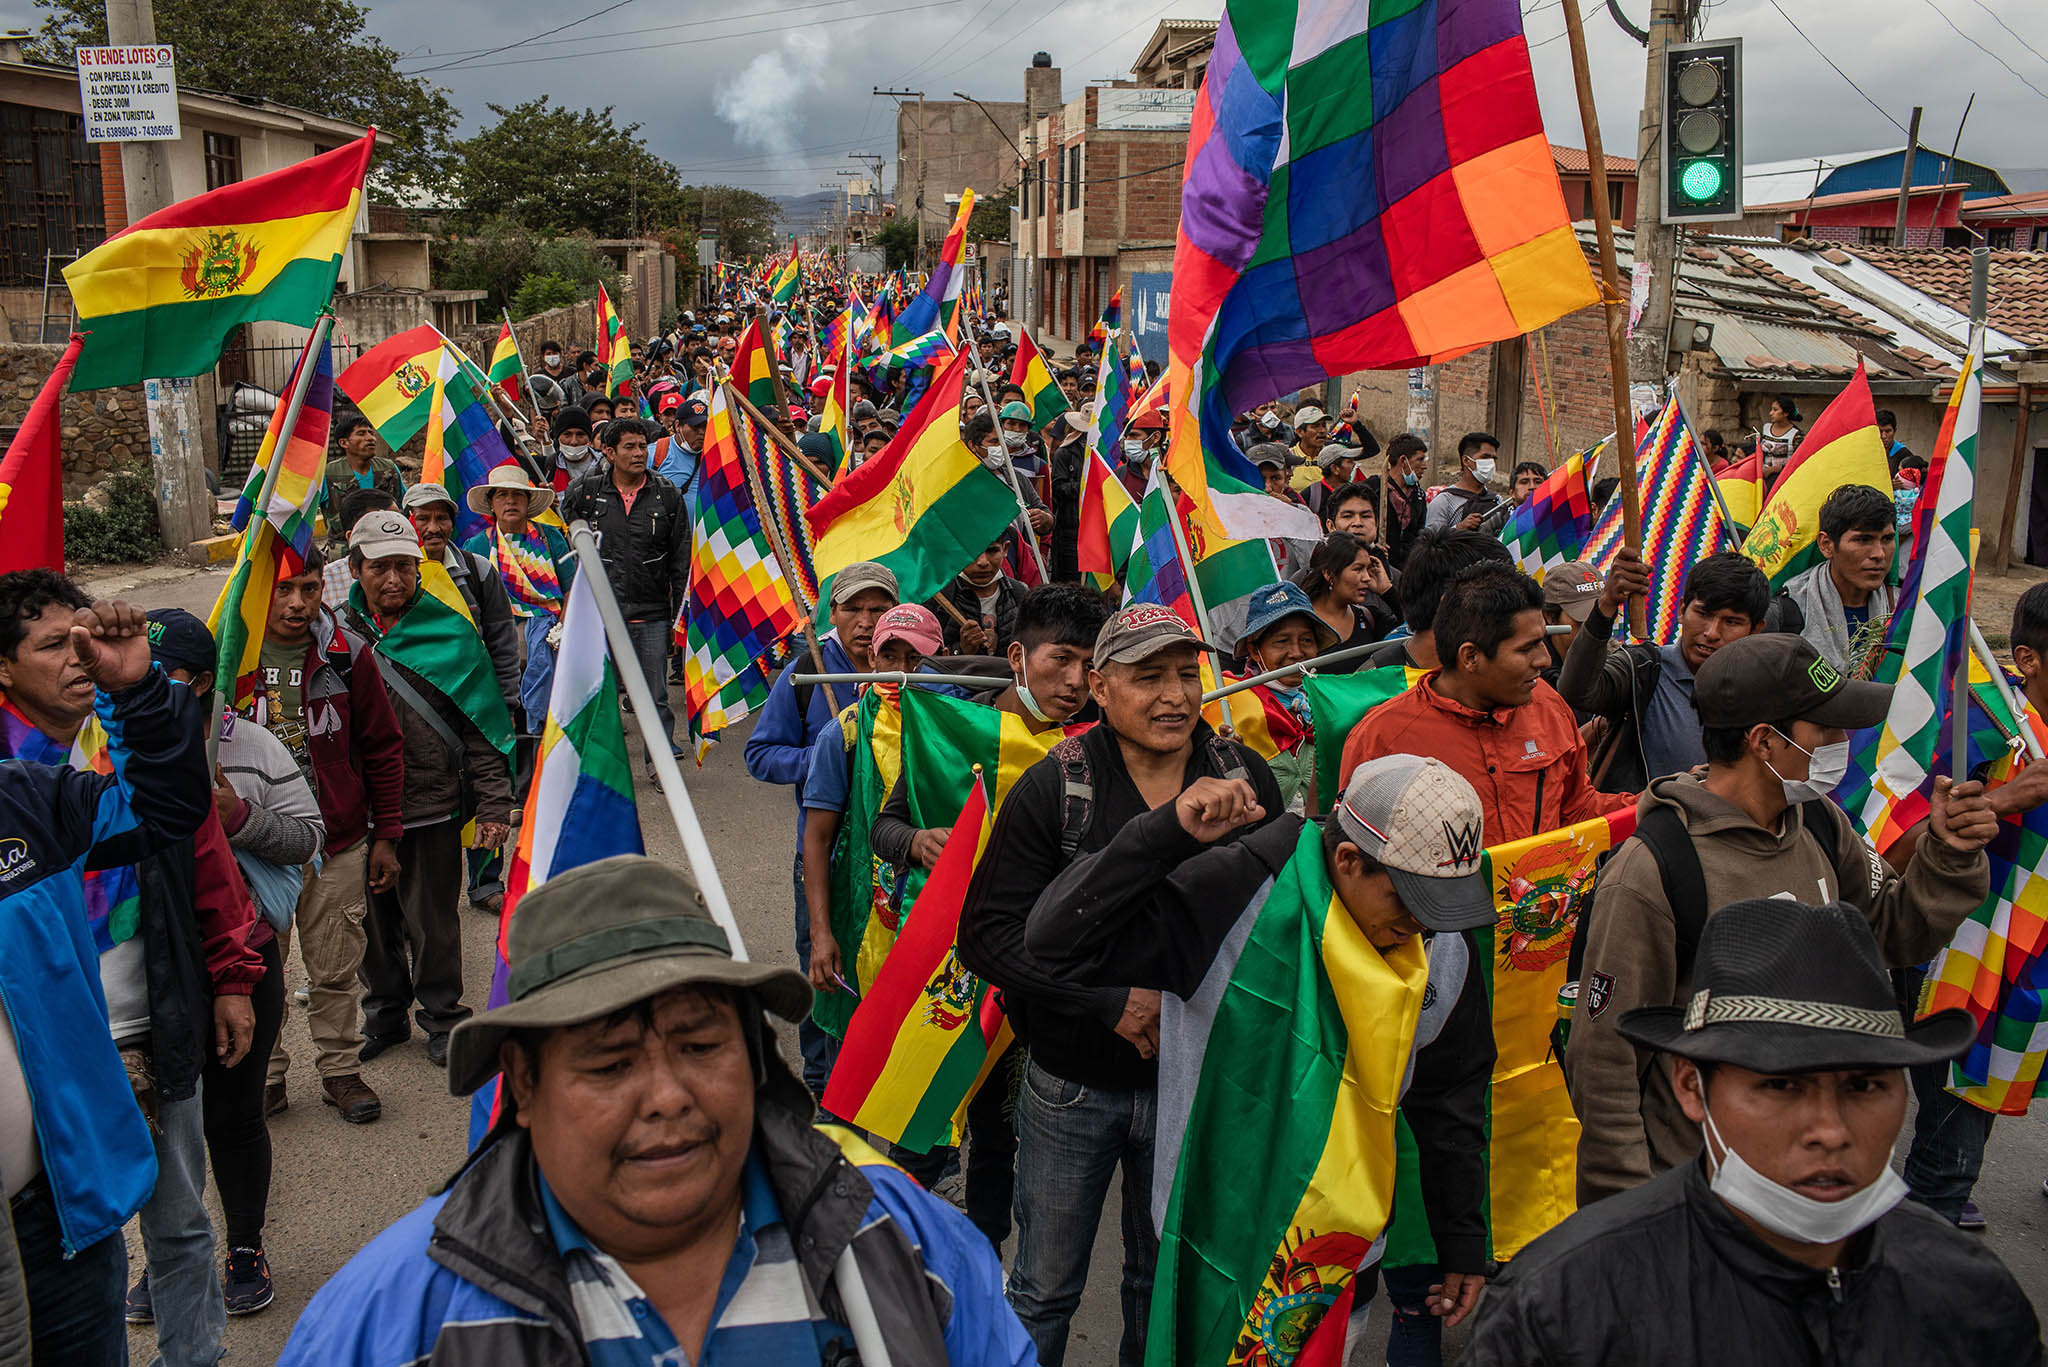 Demonstrators protest the transitional government in Sacaba, Bolivia, Nov. 14, 2019. The ouster of Bolivia’s first indigenous president exposed the deep rift between Bolivia’s Europeanized elite and majority indigenous population. (Victor Moriyama/The New York Times)